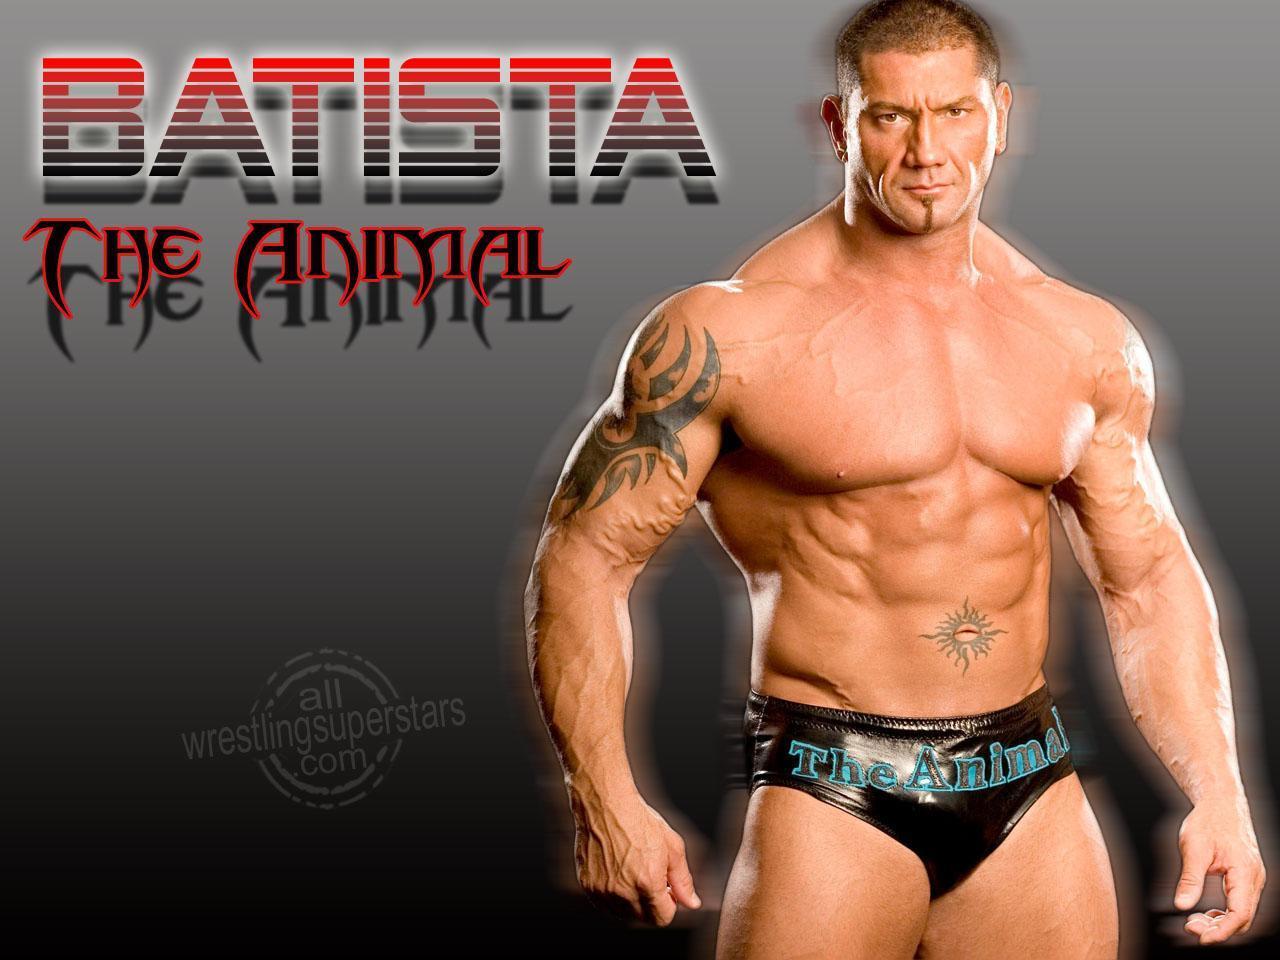 Batista Image HD Wallpaper And Background Photos